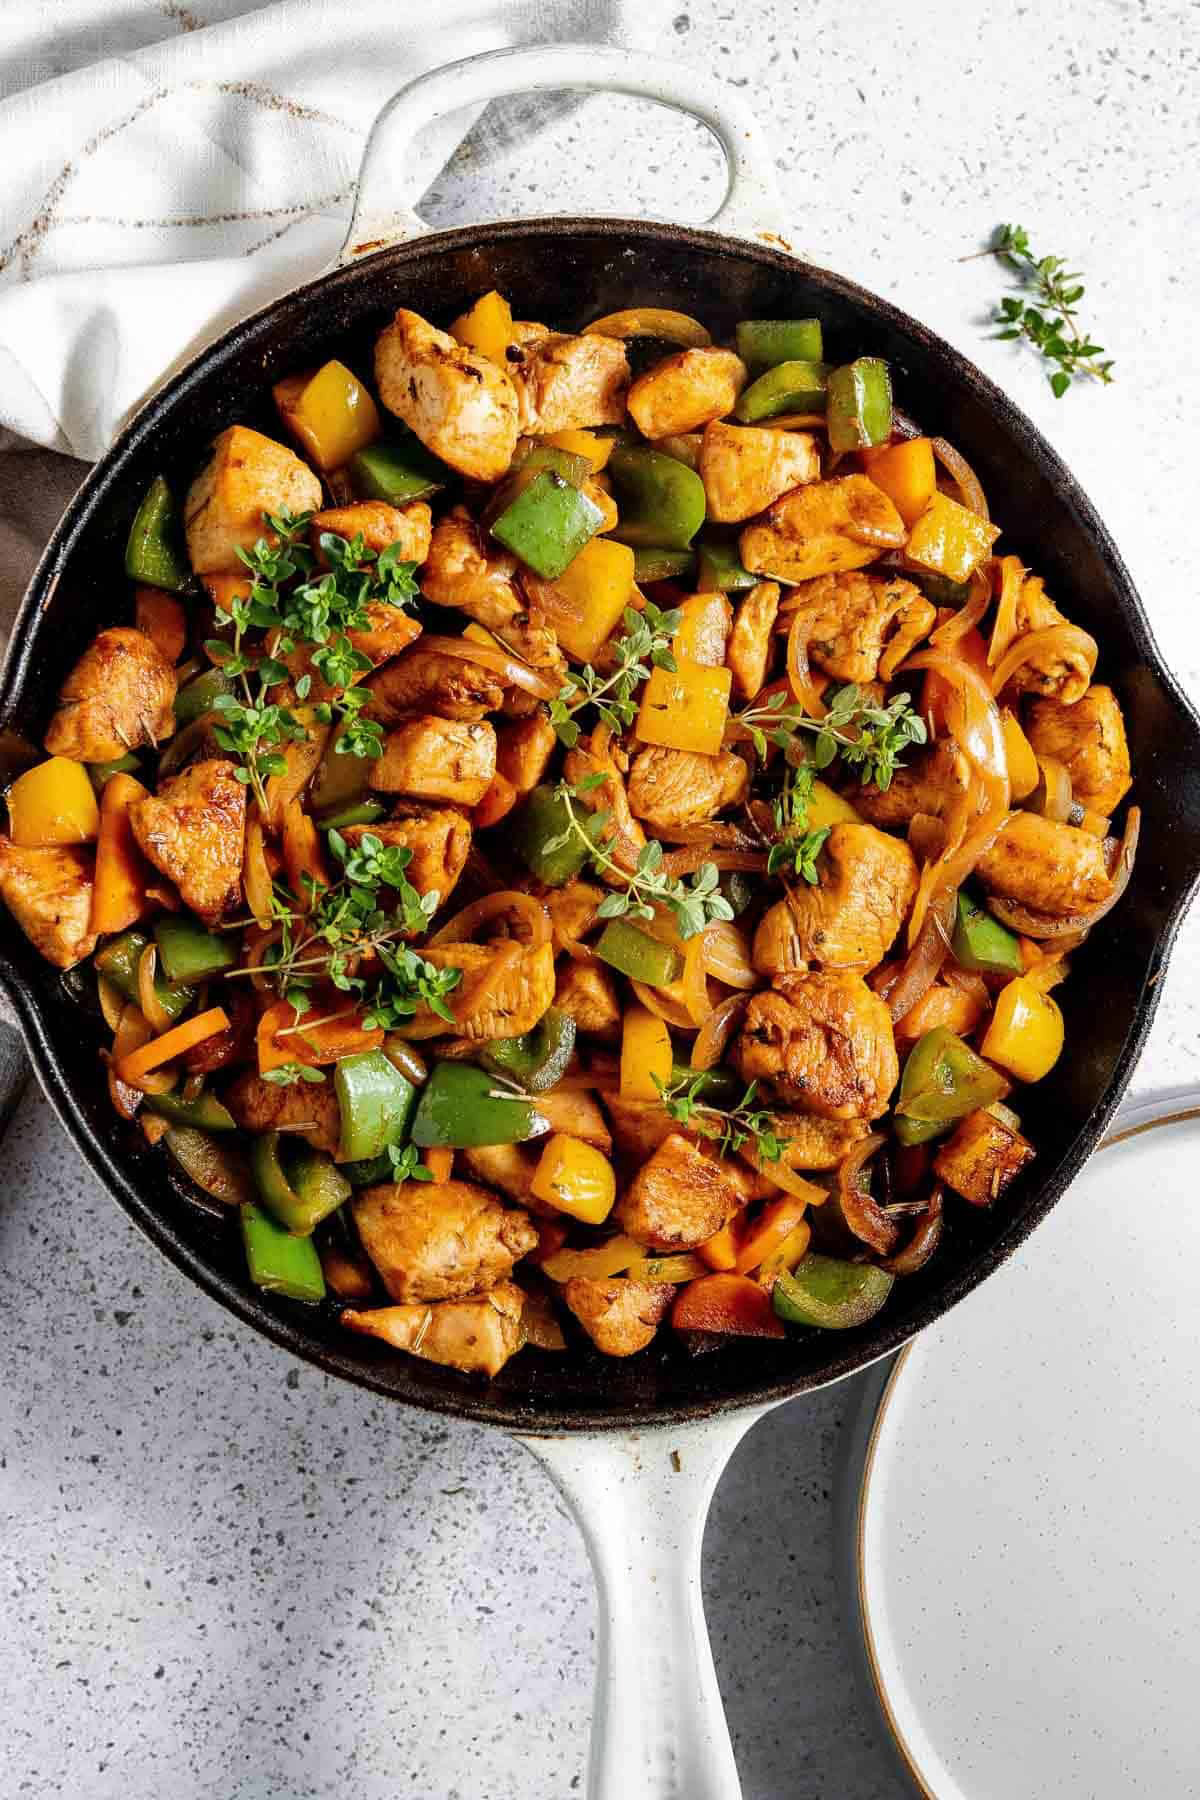 Simplify Dinner: Tasty Recipes in Just One Pan